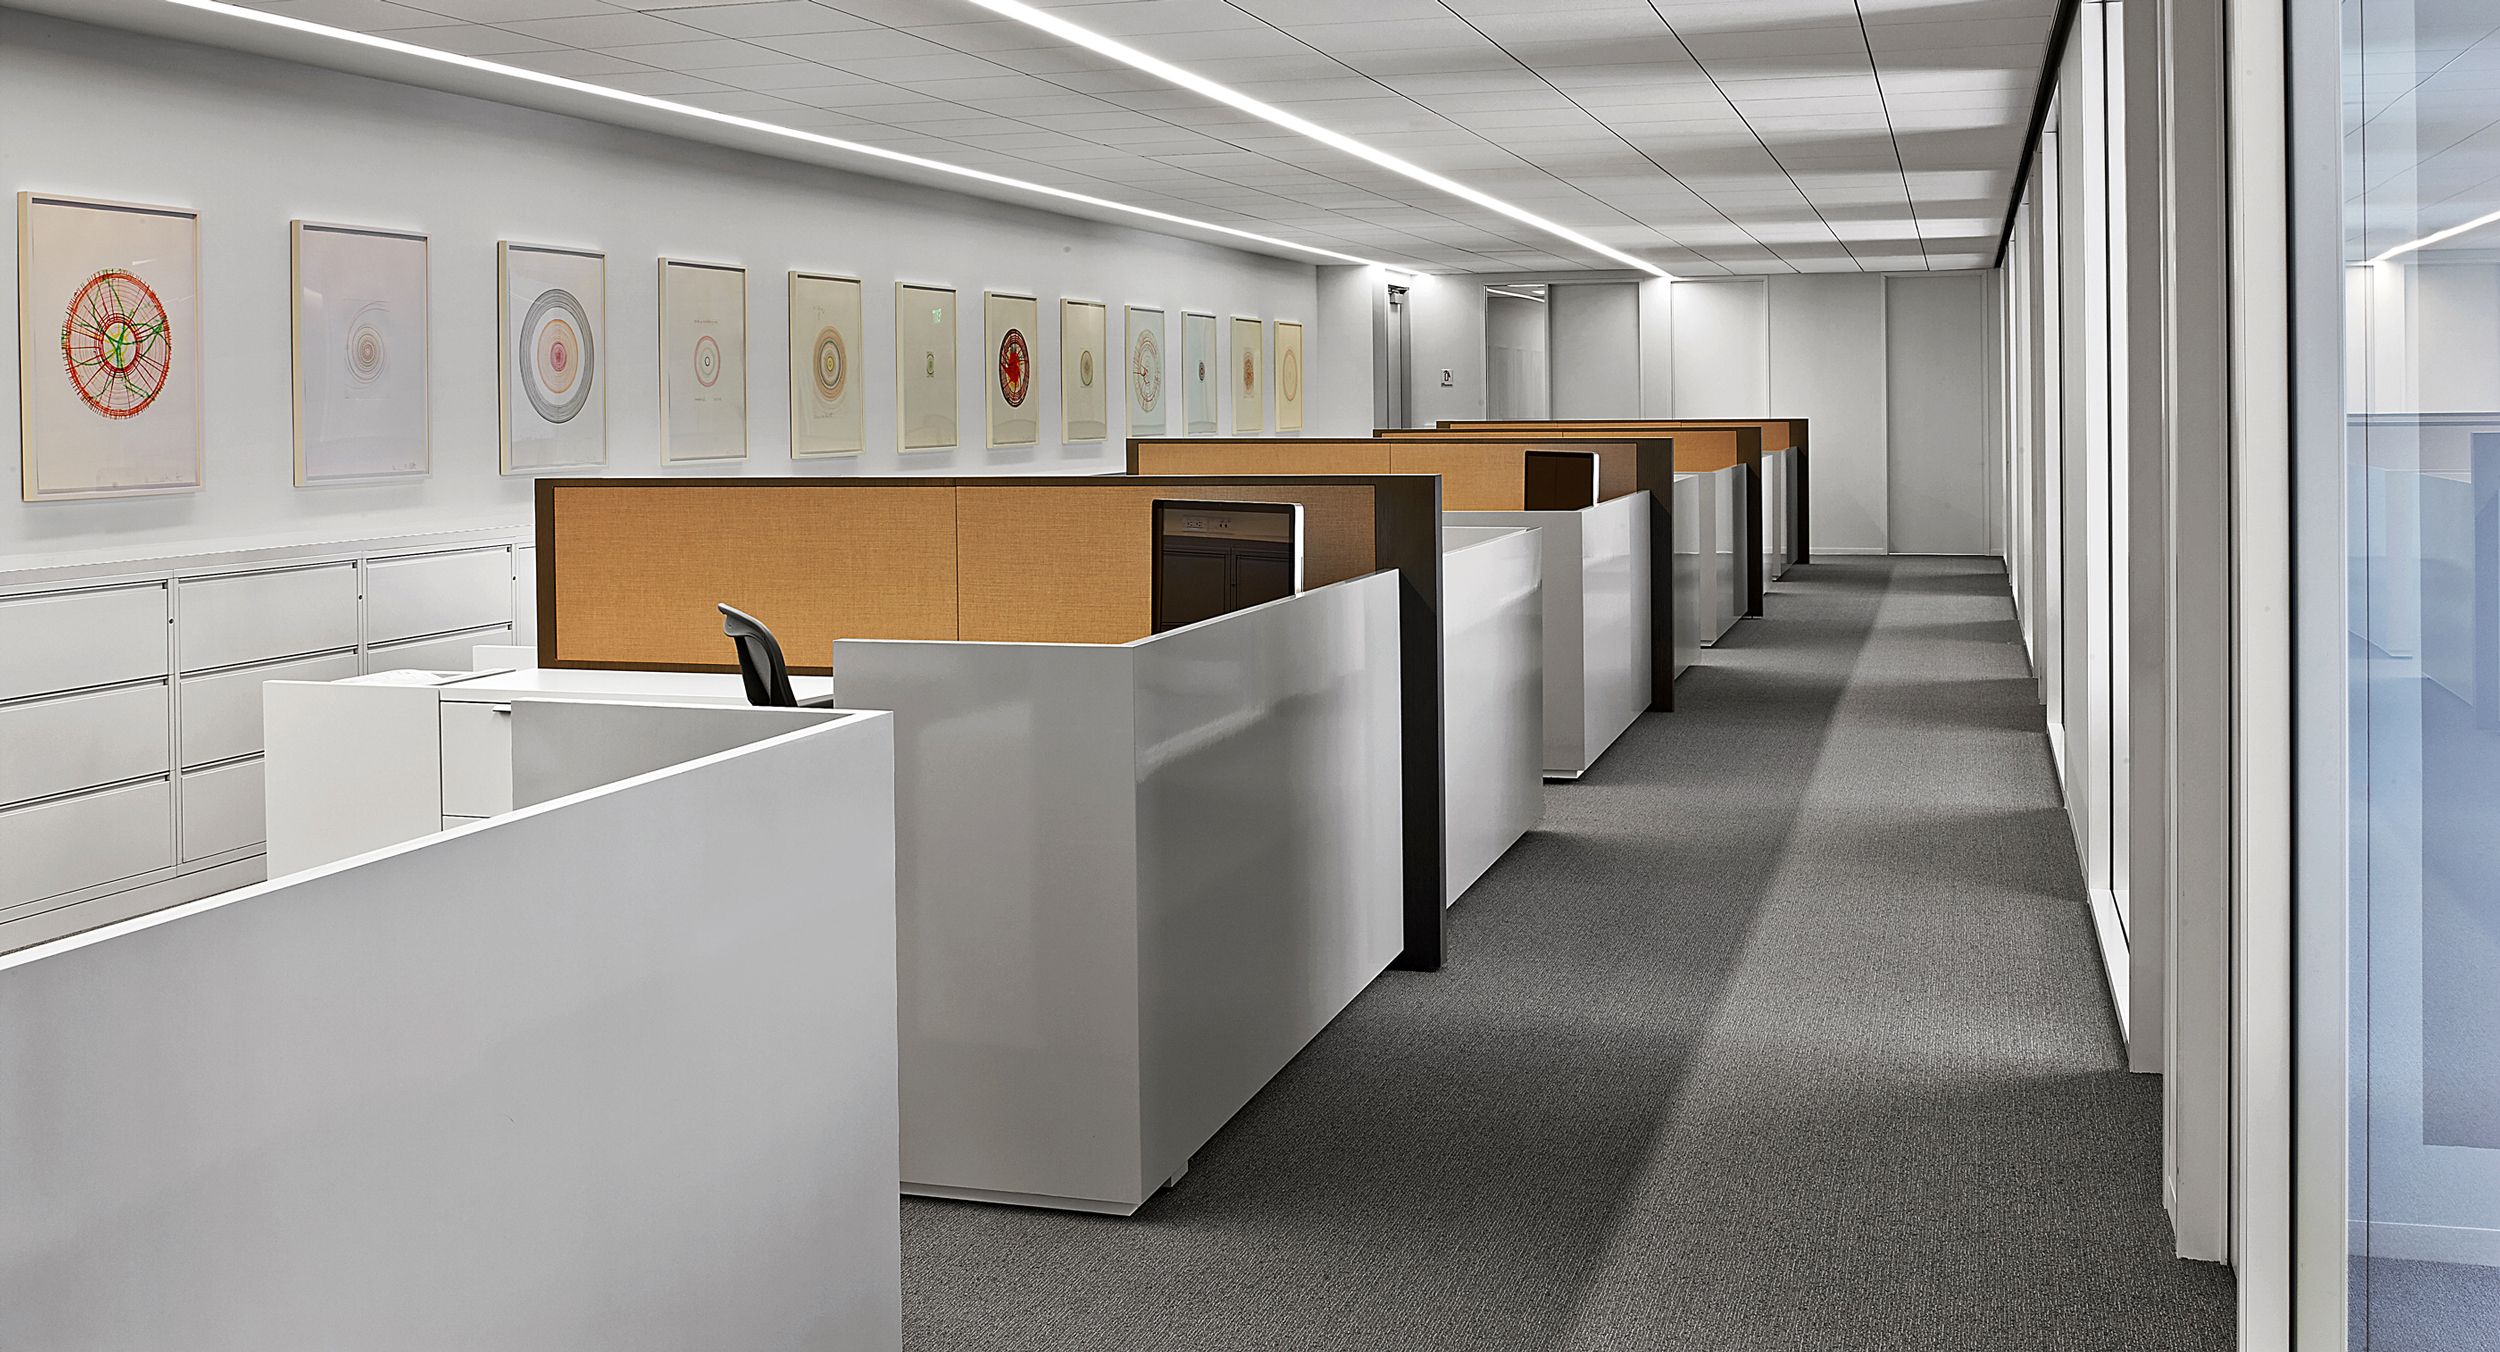 White Chemcolor surround panels convey clean, modern lines.